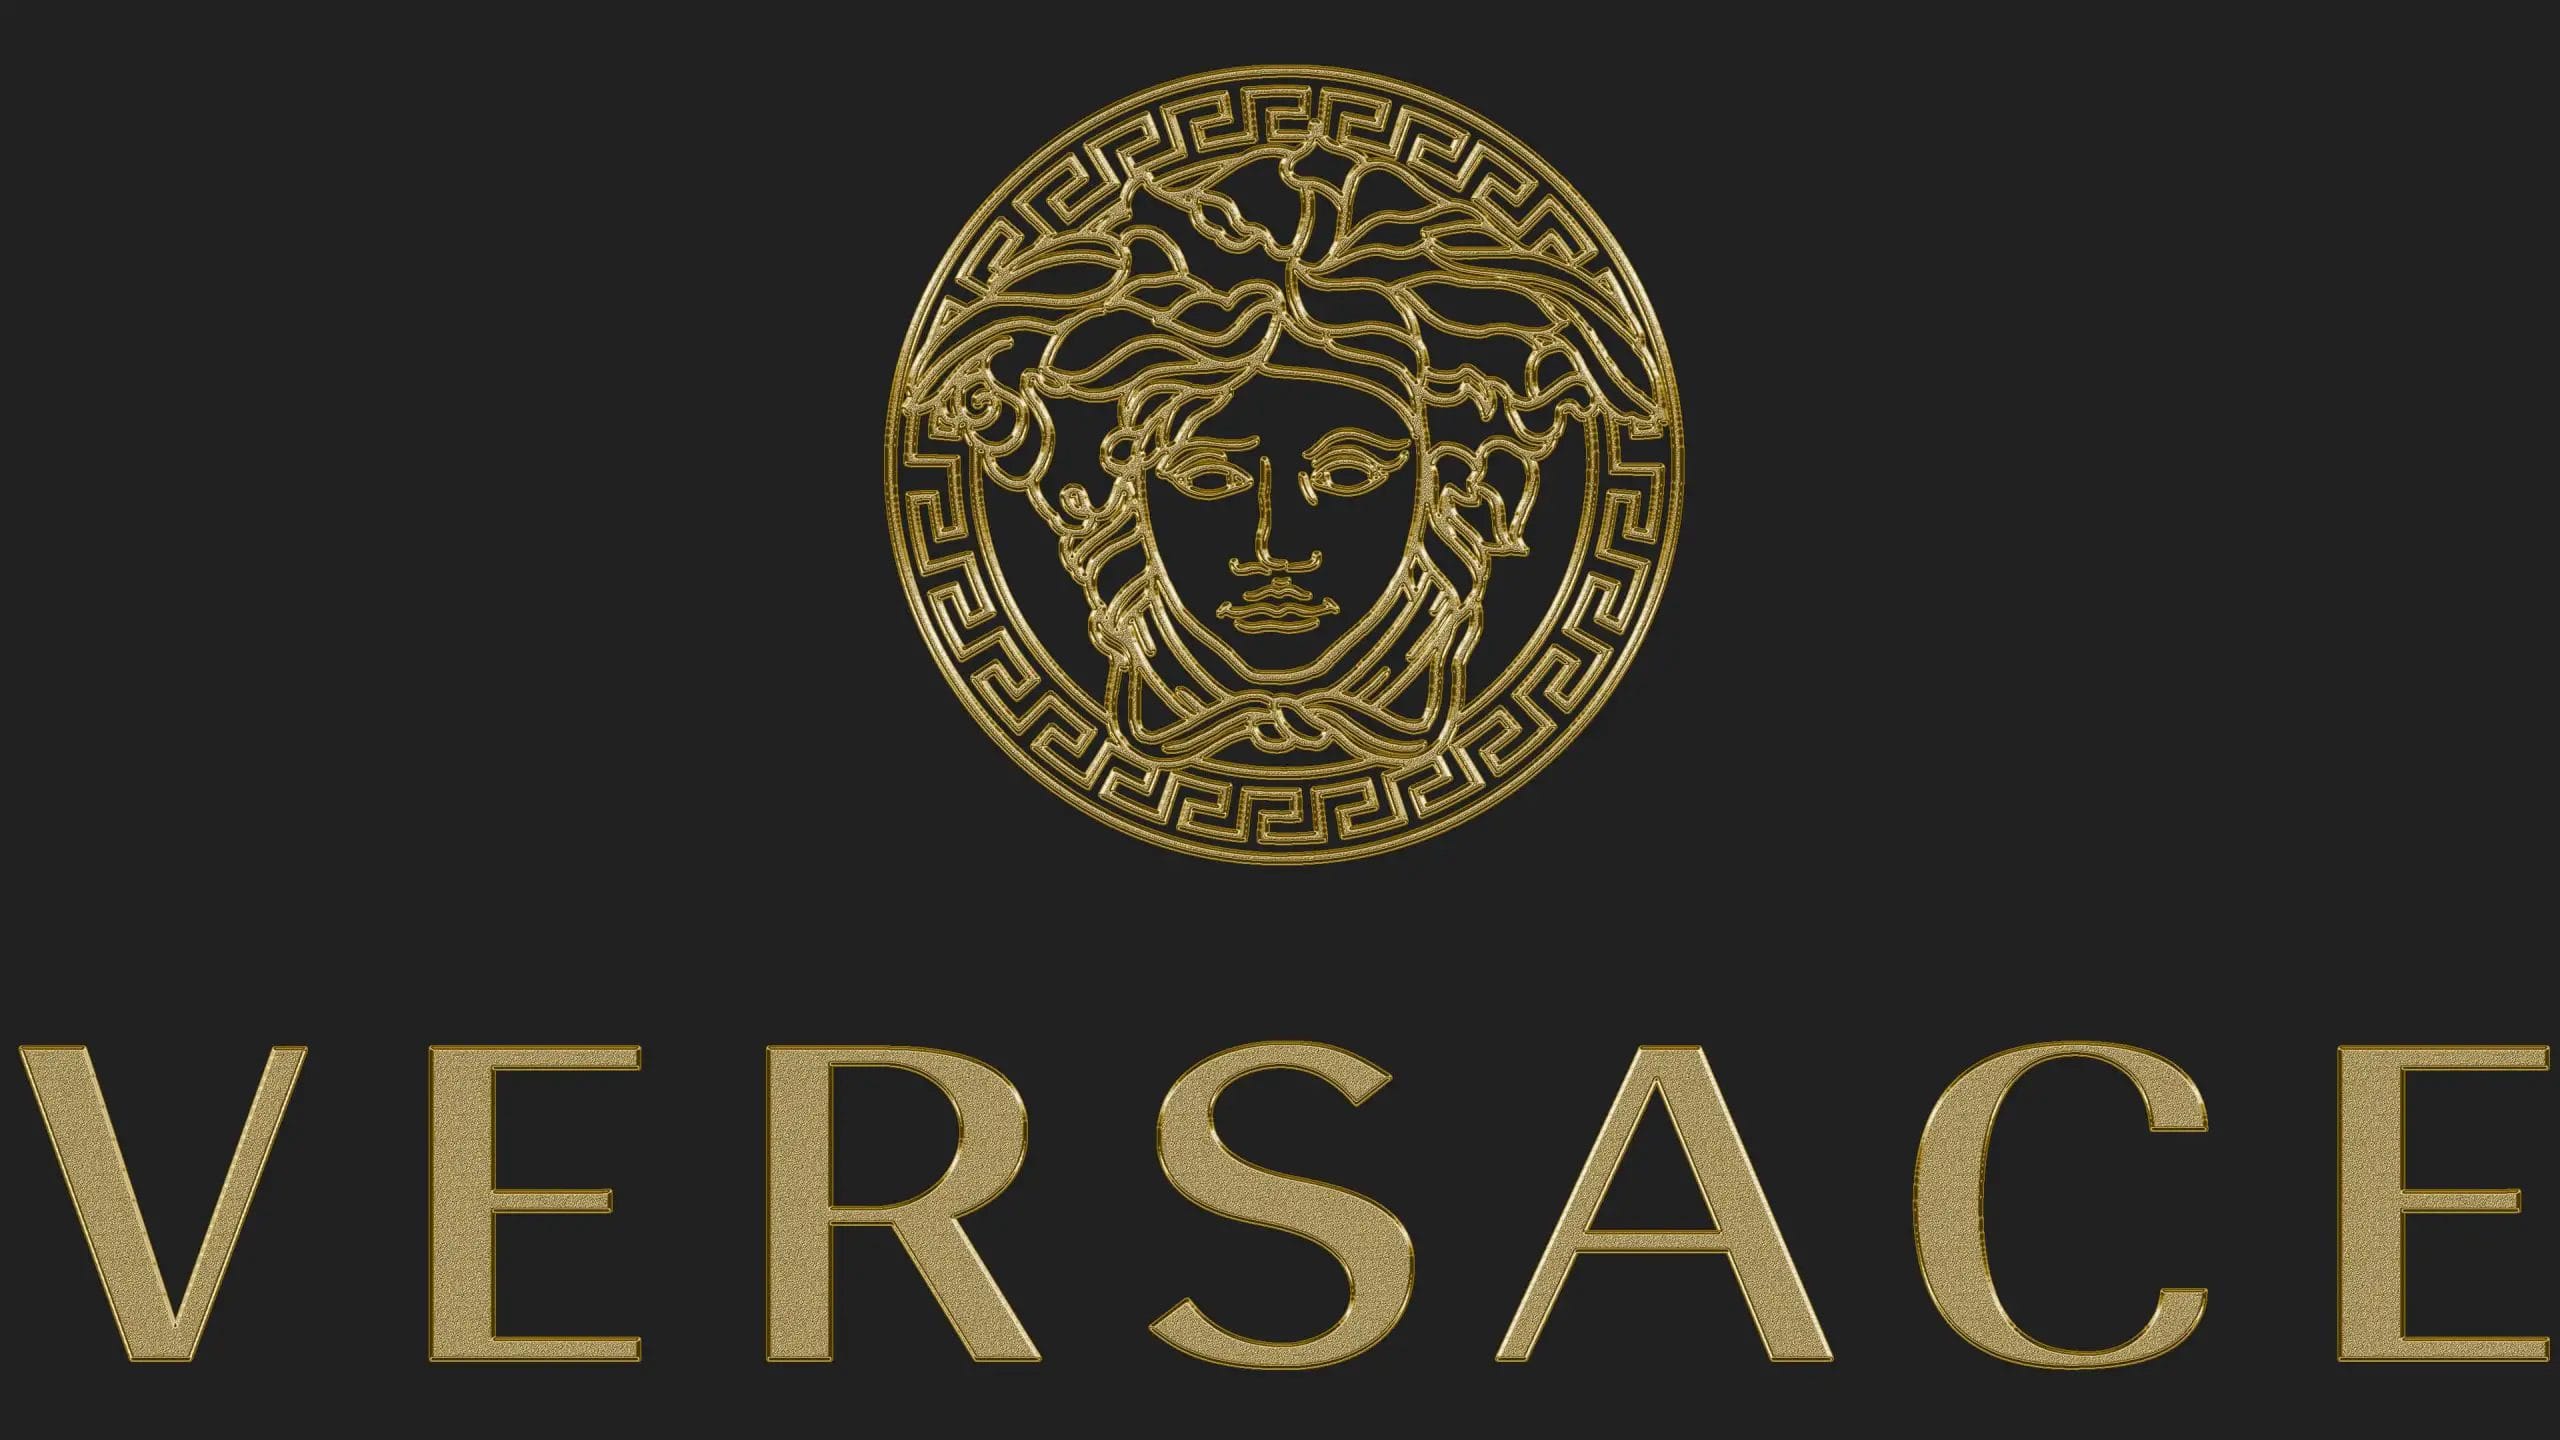 Gianni Versace: a big name in fashion to be remembered - Panorama